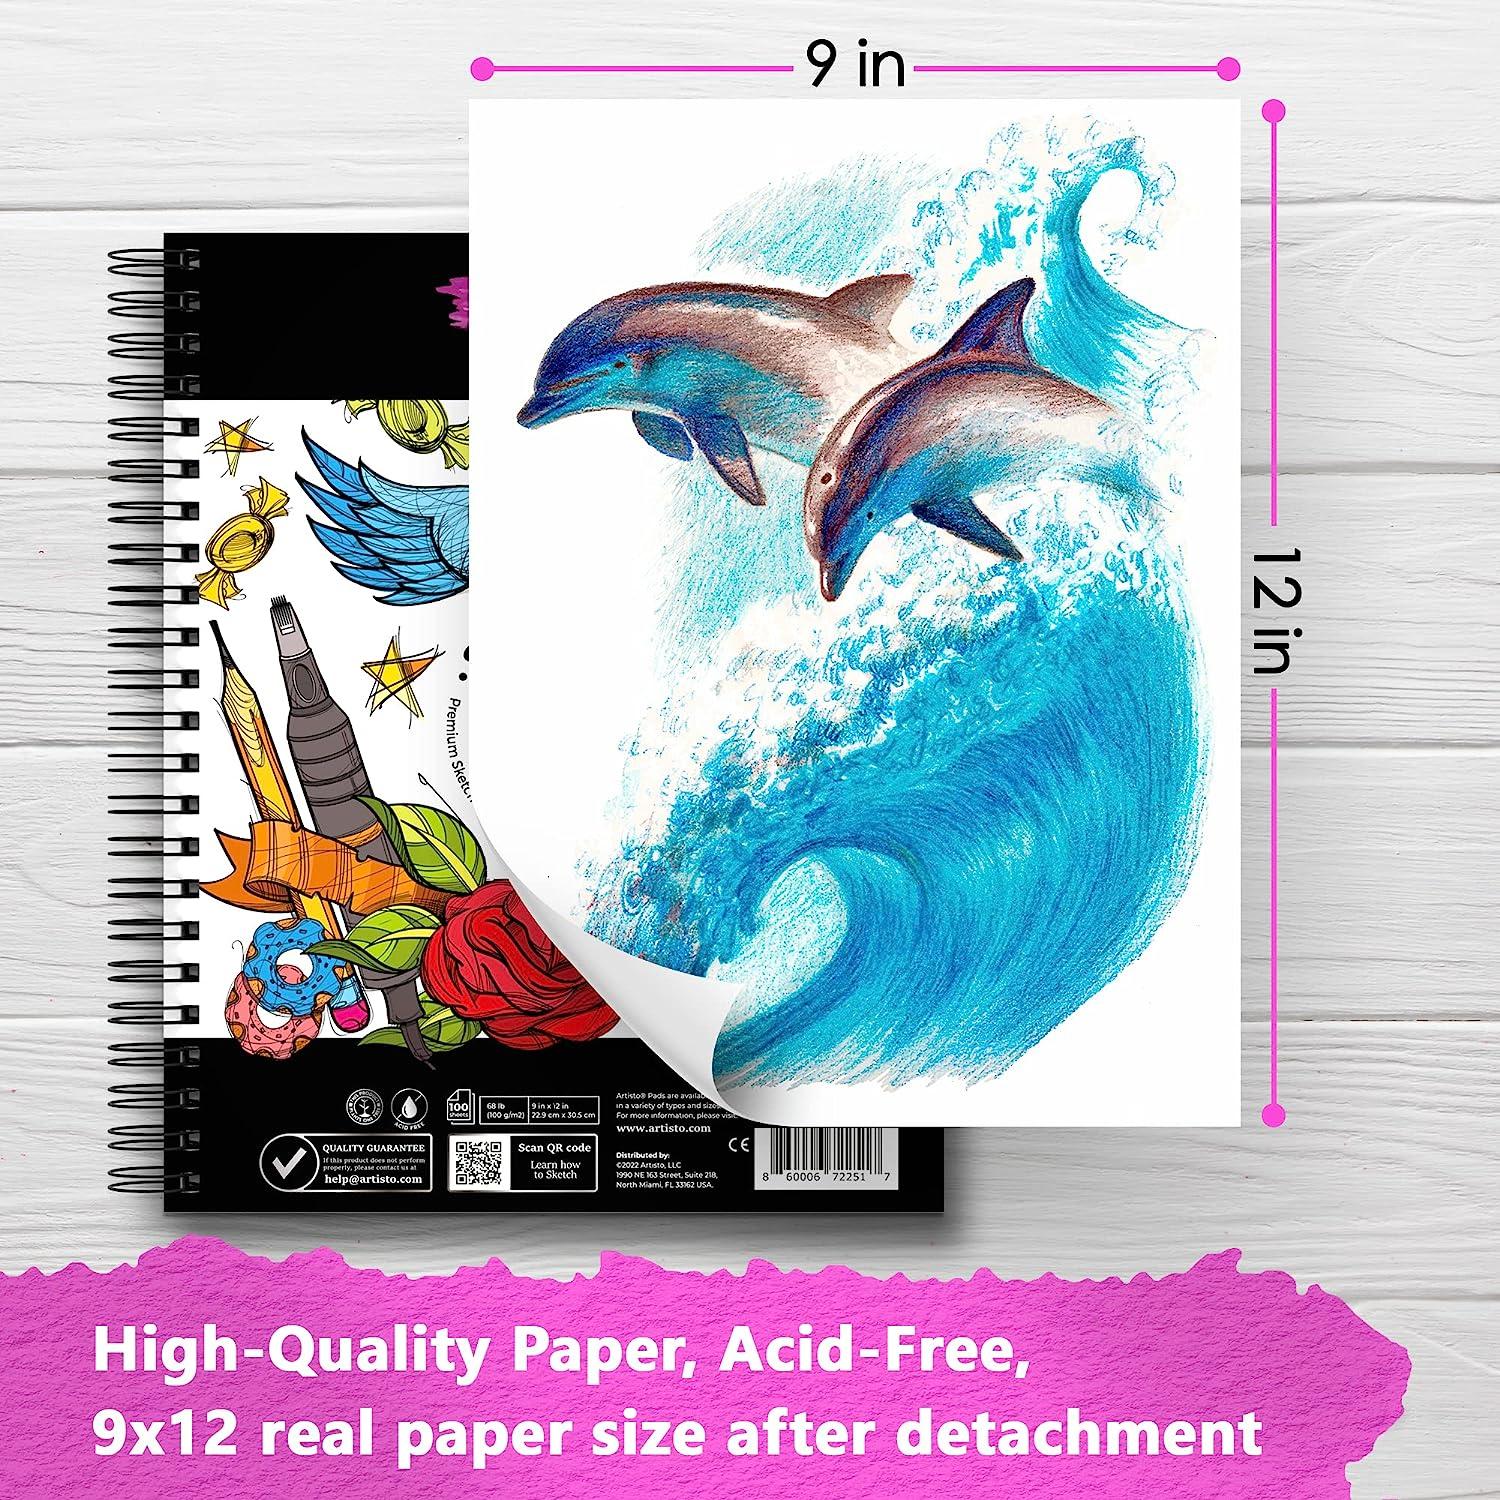 Artisto 9x12 Premium Sketch Book Set, Spiral Bound, Pack of 2, 200 Sheets  (100g/m2), Acid-Free Drawing Paper, Ideal for Kids, Teens & Adults.